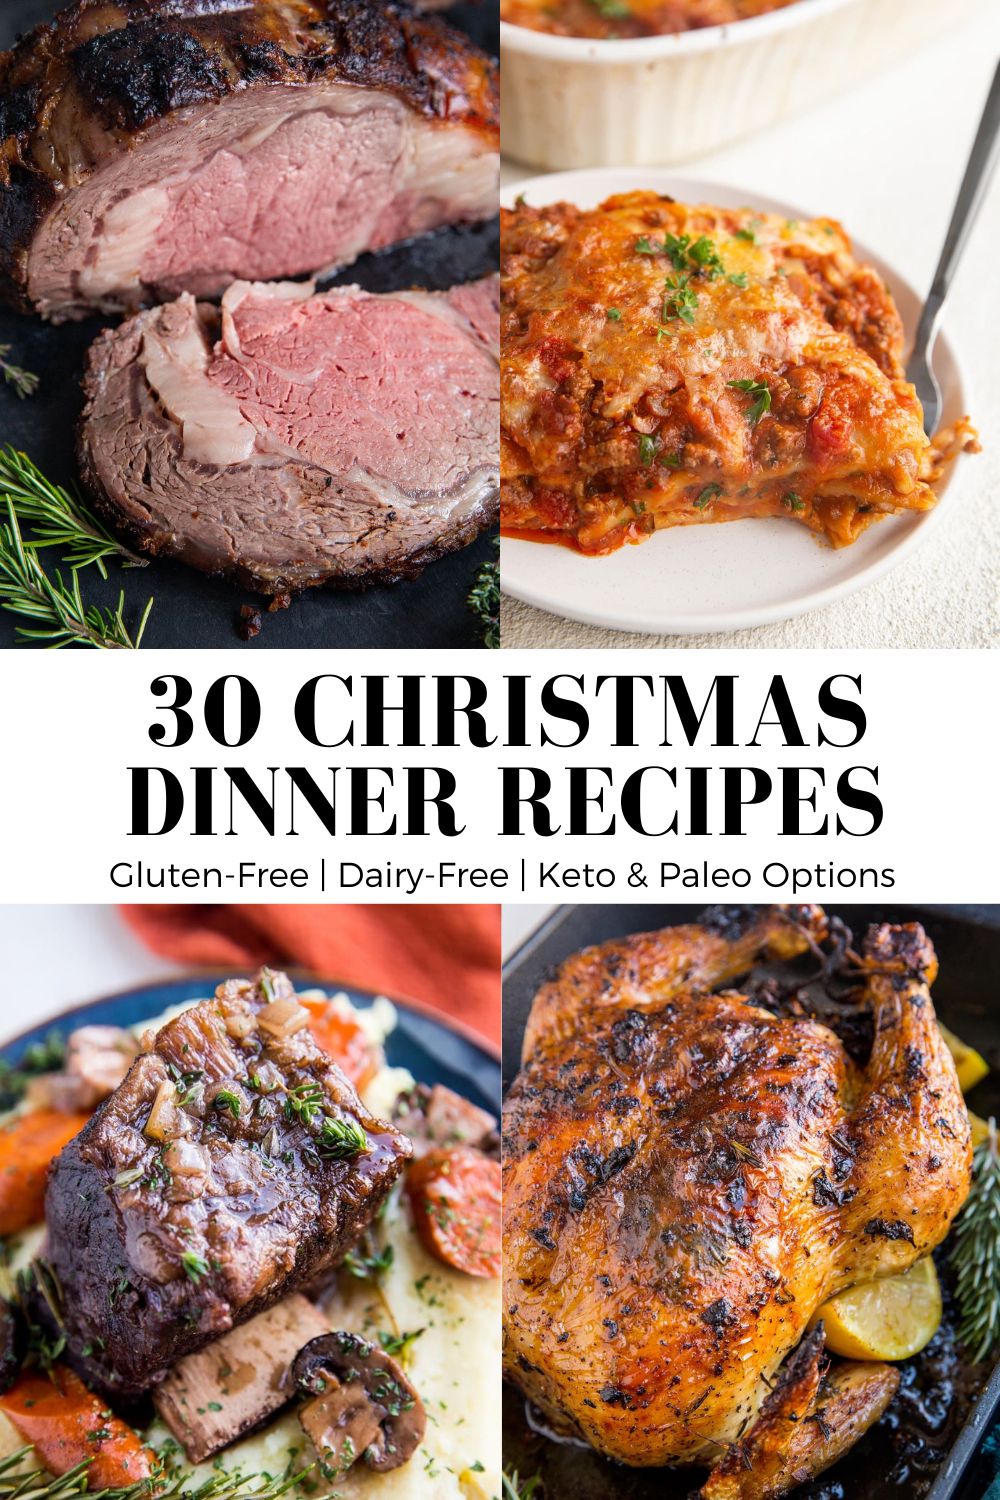 25 Healthy Christmas Dinner Ideas! Easy, mouth-watering show-stopping meals for your holiday gathering. Includes side dishes and desserts!